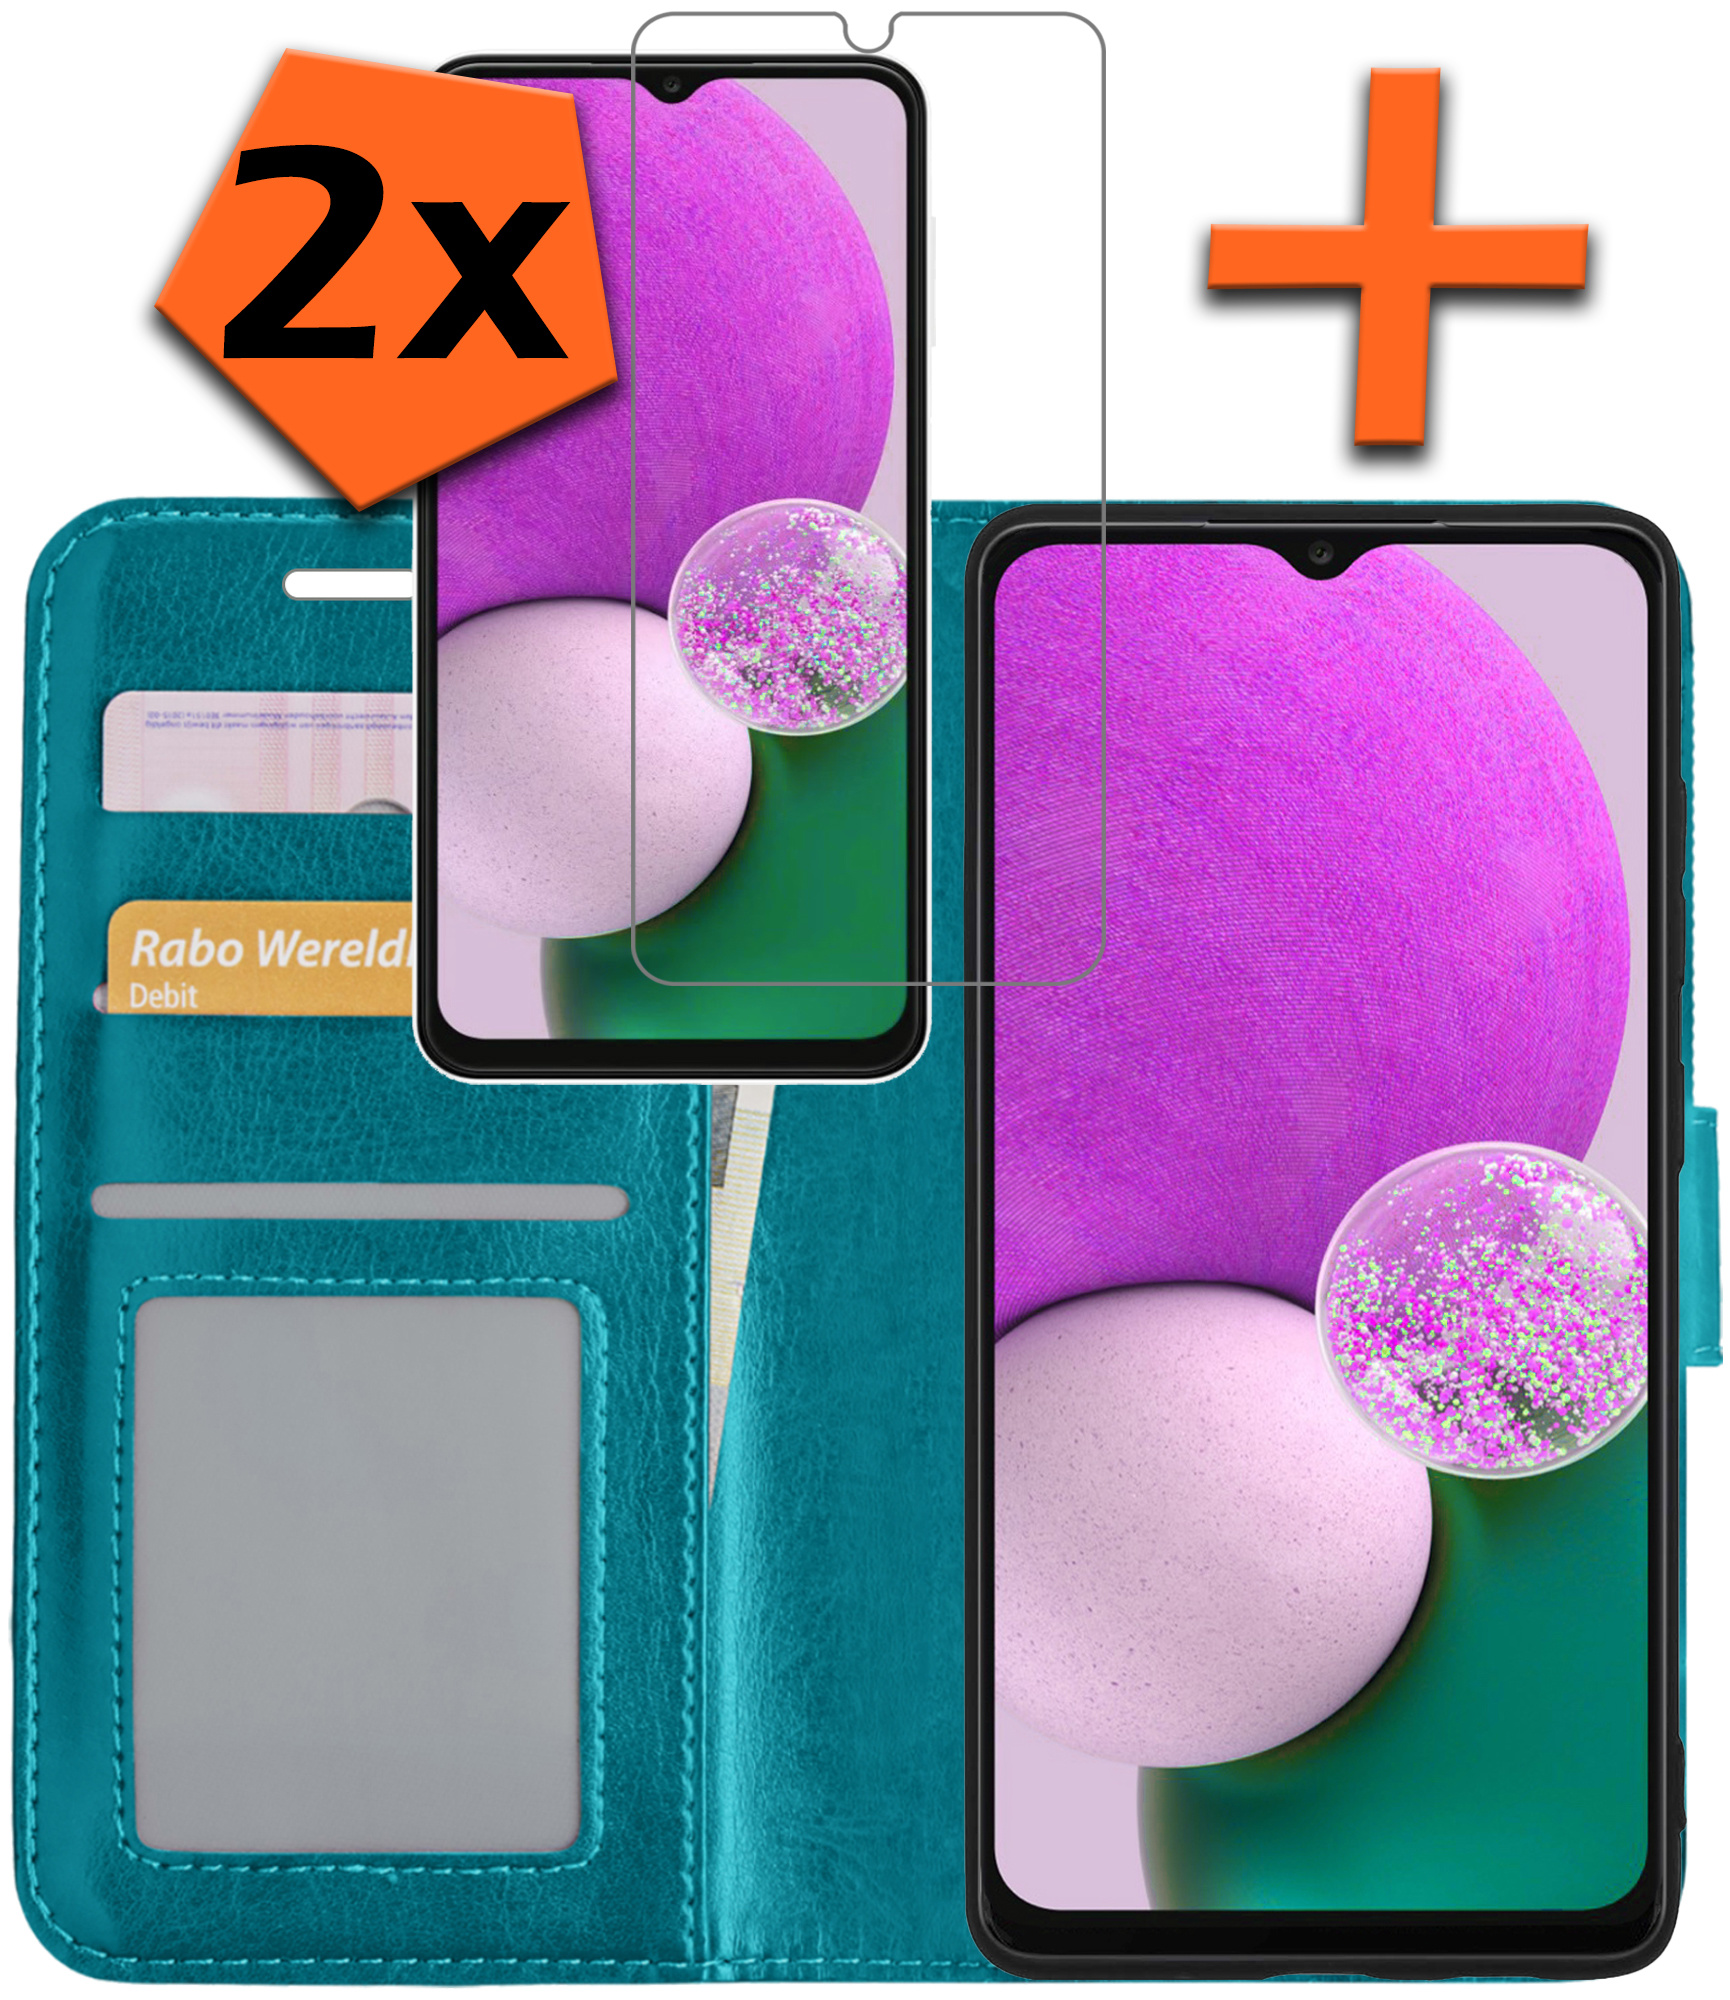 Samsung Galaxy A13 4G Hoesje Bookcase Met 2x Screenprotector - Samsung Galaxy A13 4G Screenprotector 2x - Samsung Galaxy A13 4G Book Case Met 2x Screenprotector Turquoise